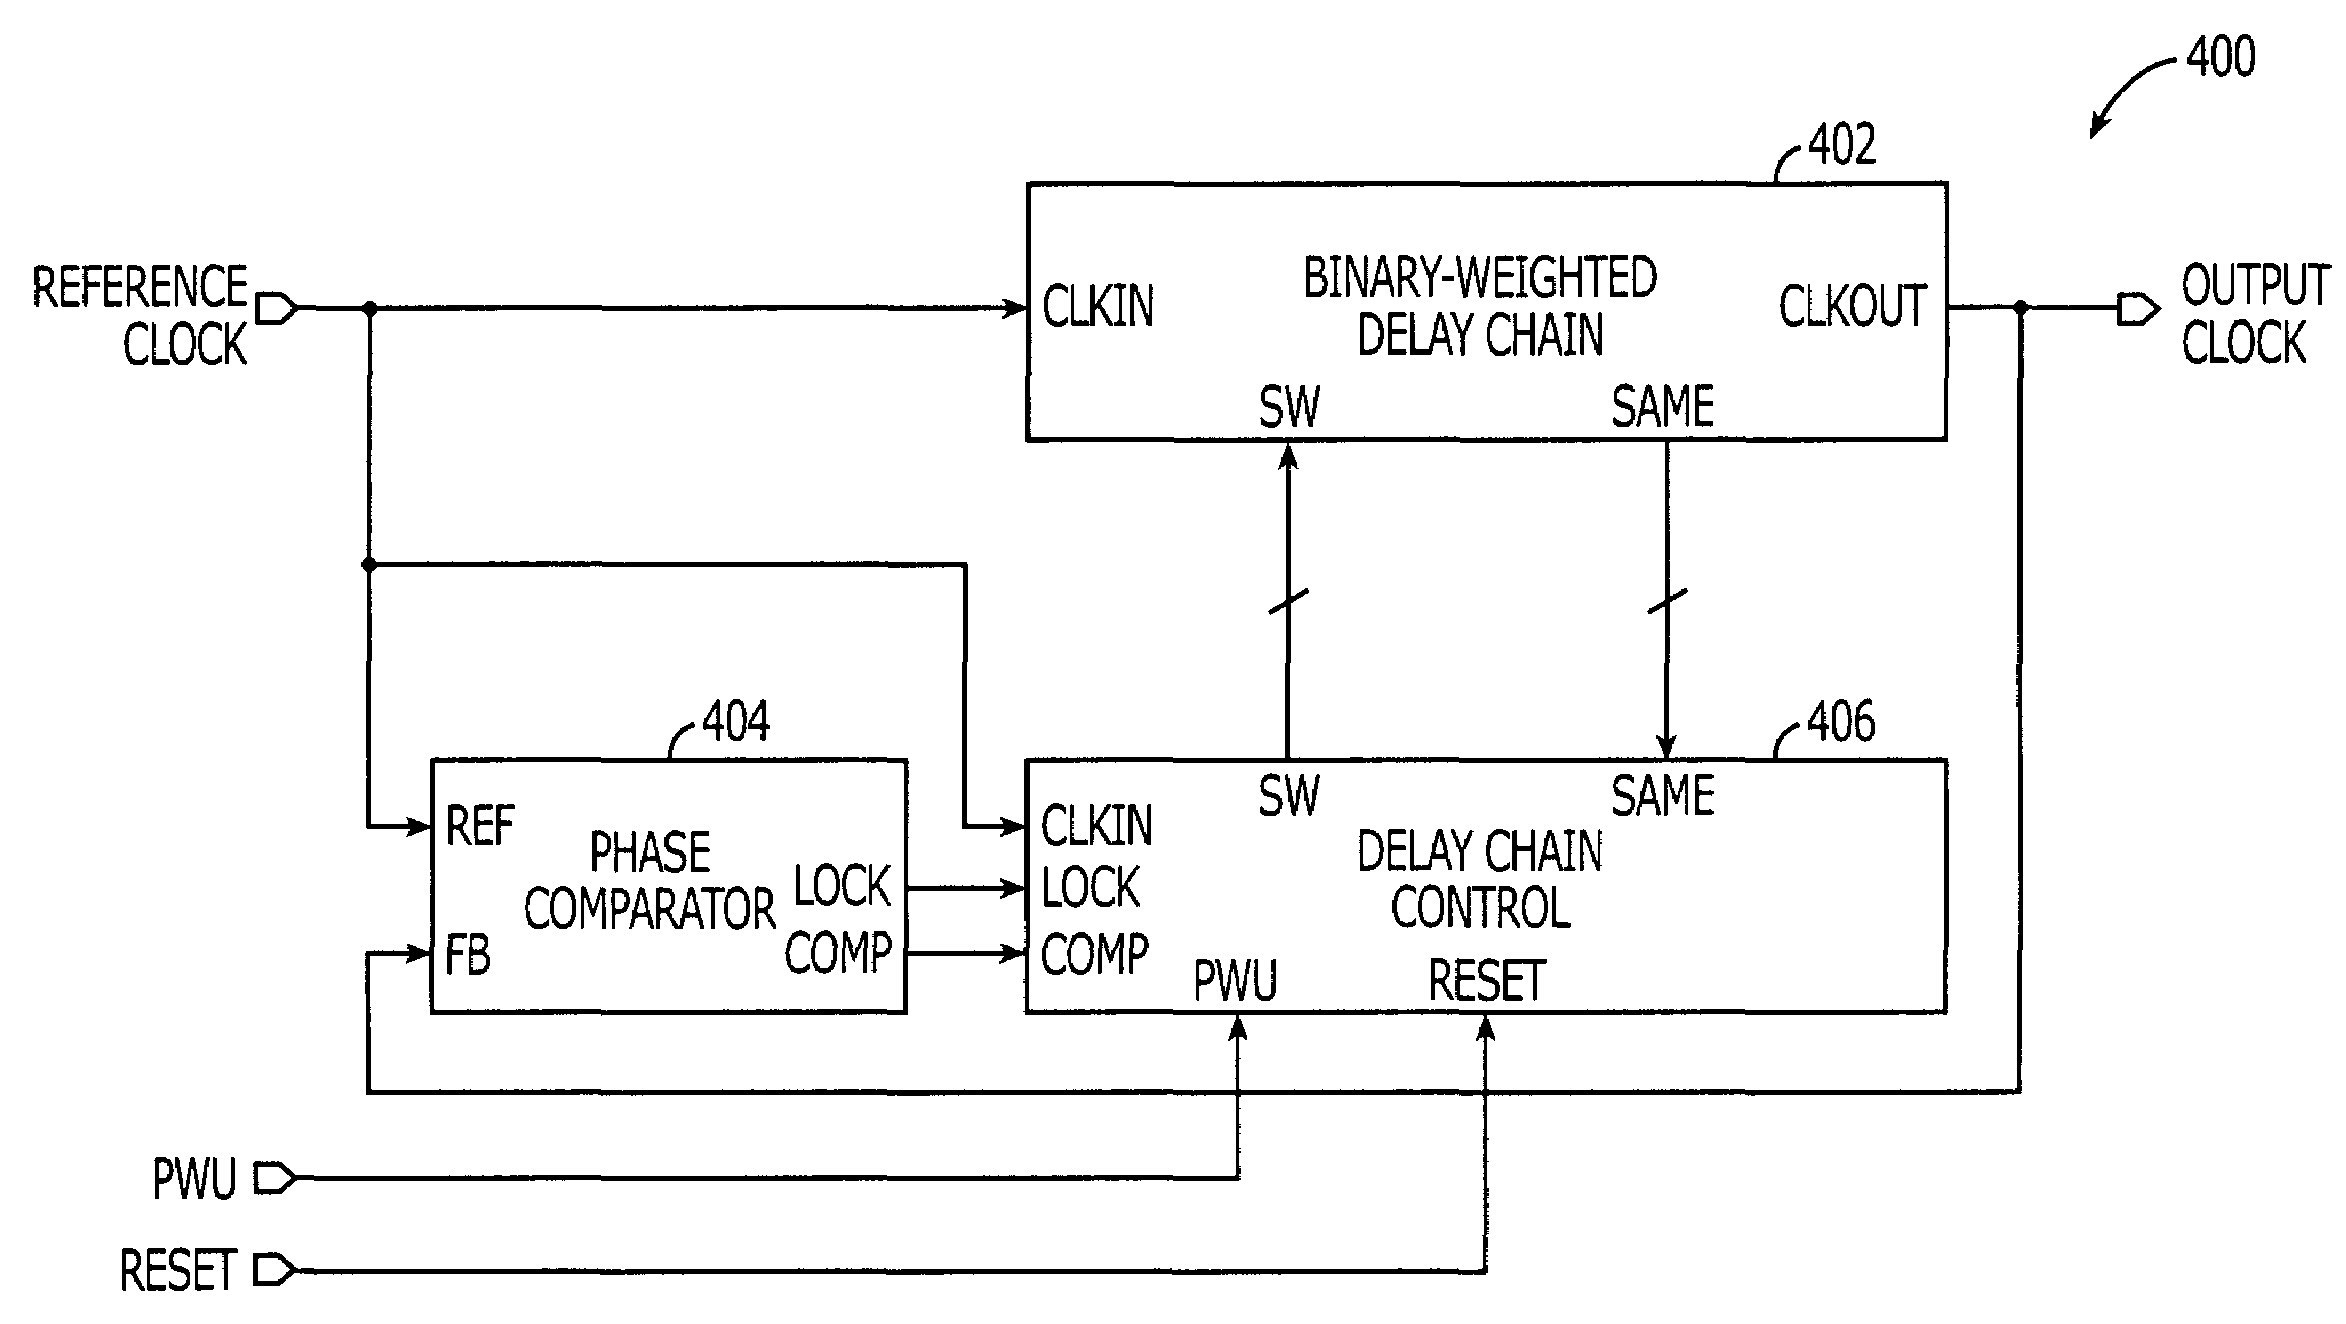 Delay-locked loop (DLL) integrated circuits having binary-weighted delay chain units with built-in phase comparators that support efficient phase locking